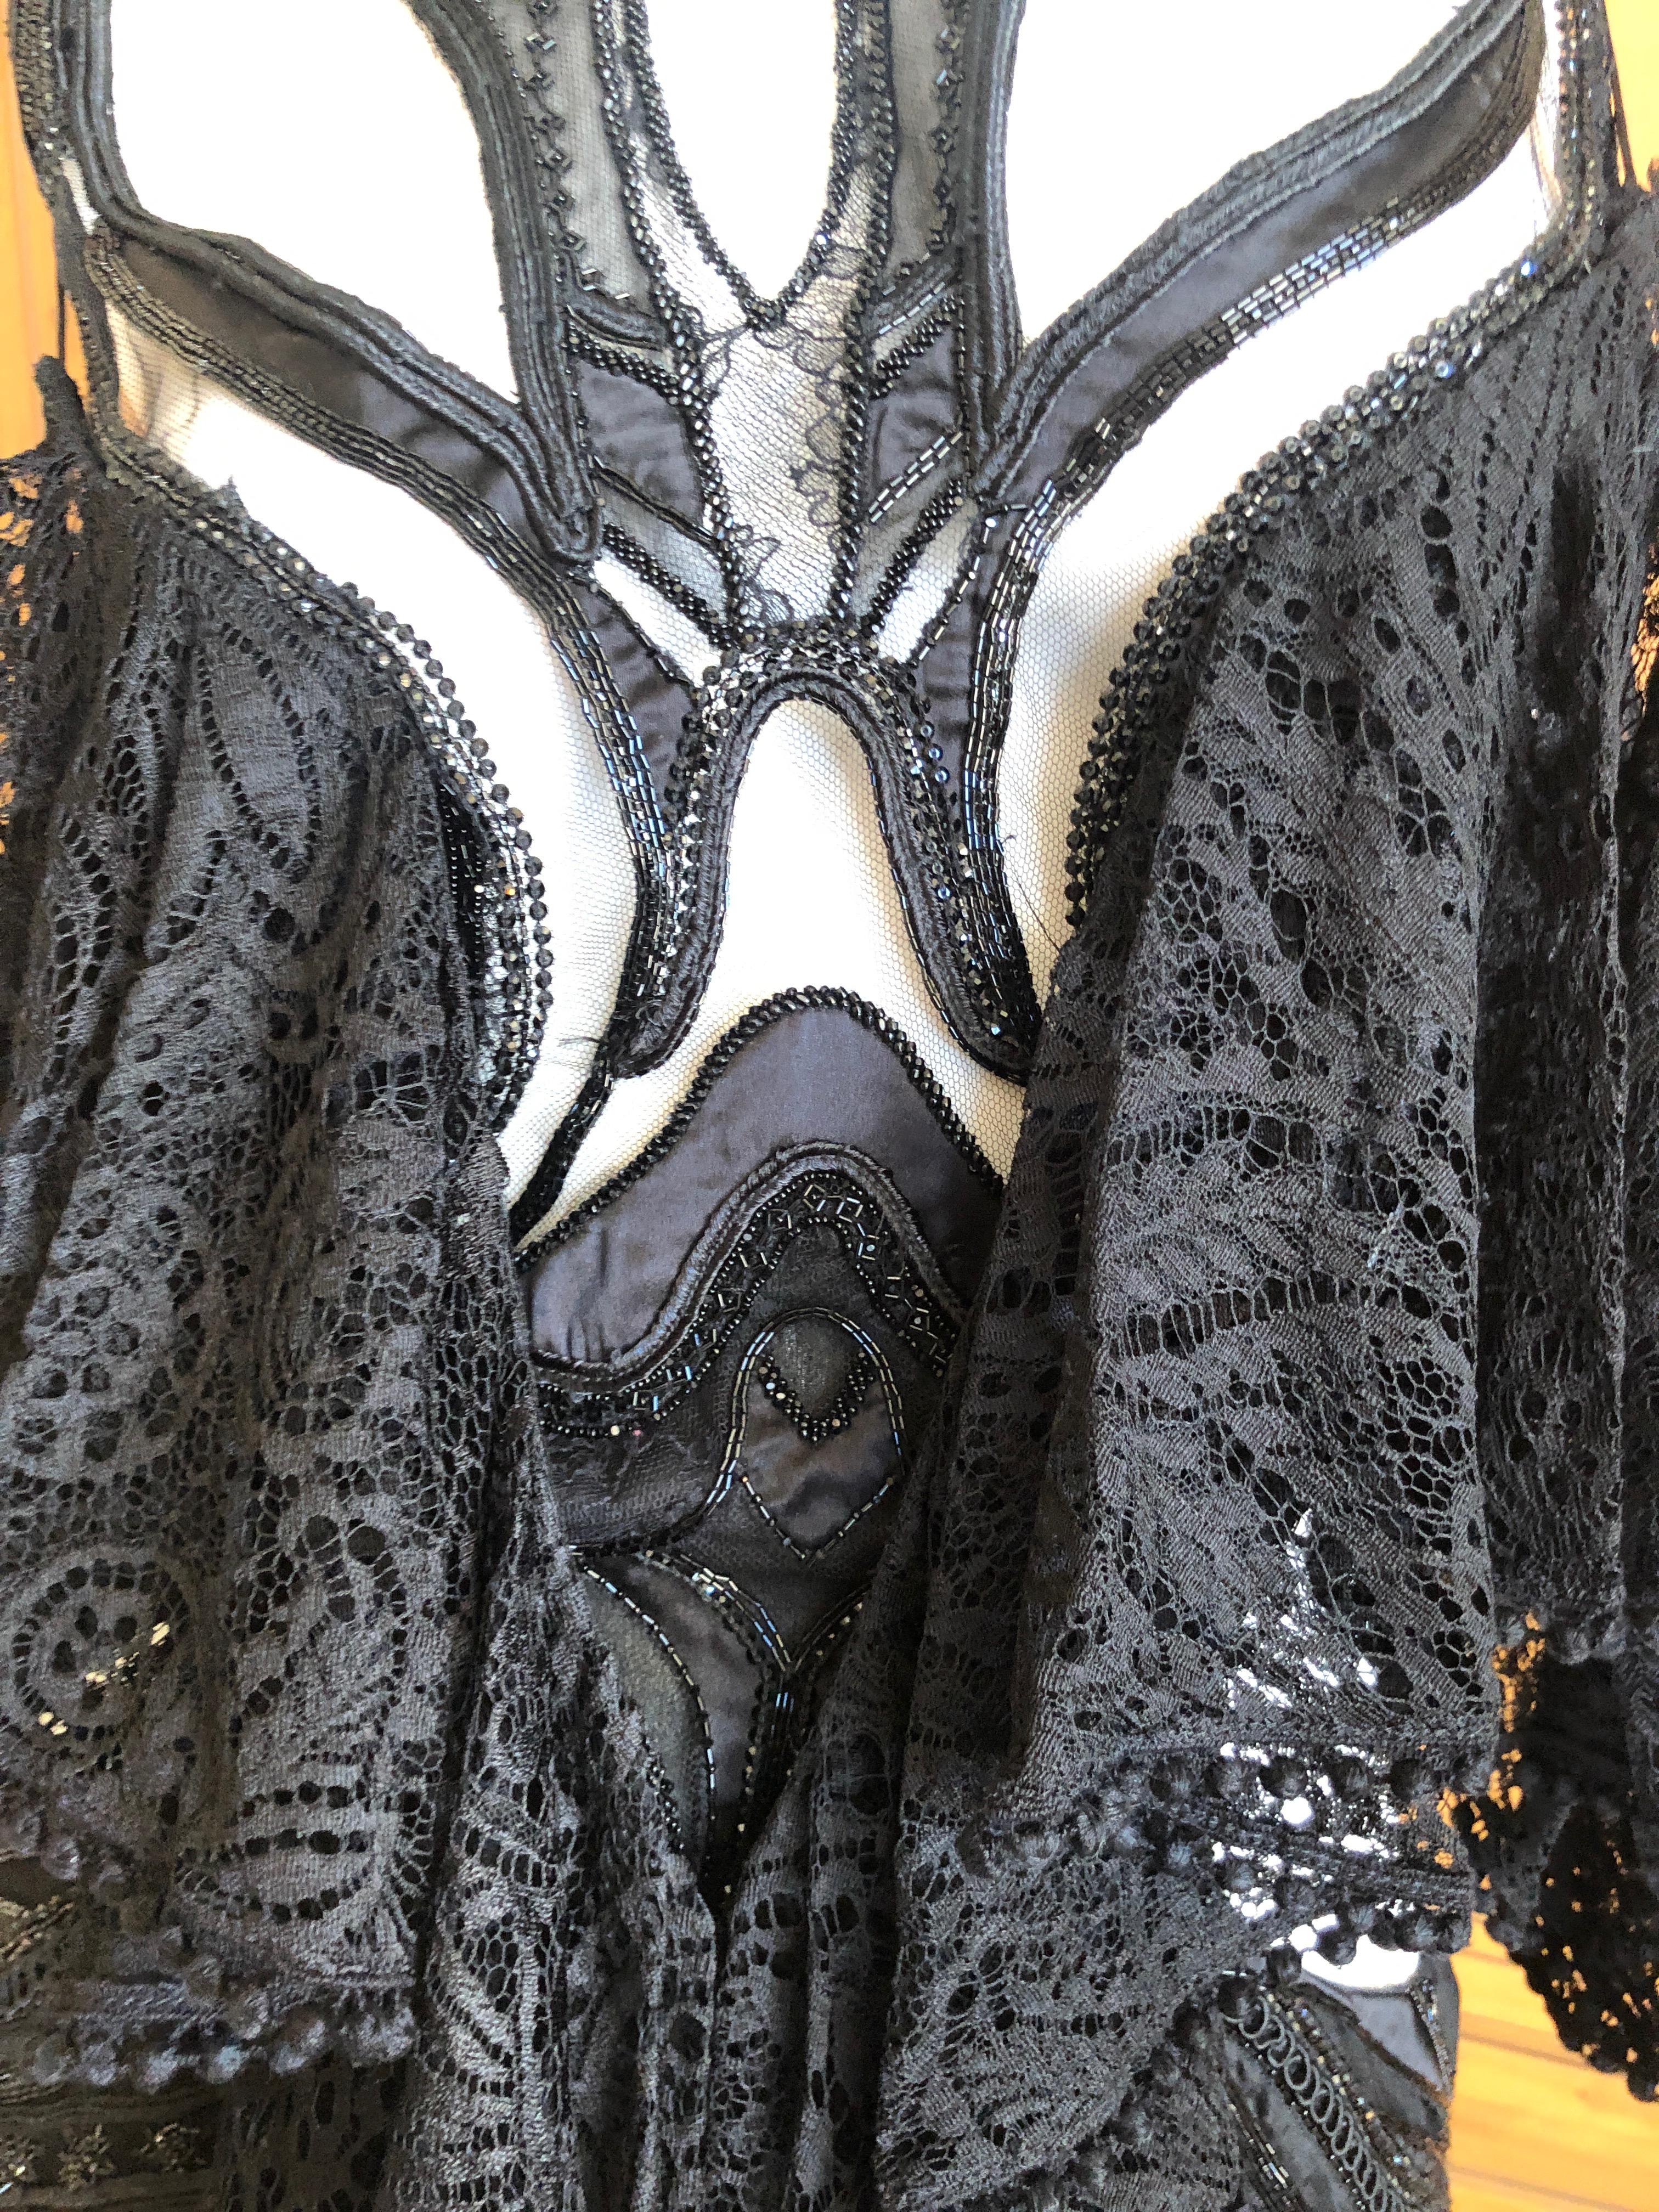 Alexander McQueen Pre Fall 2018 Goth Black Lace Beaded Dress by Sarah Burton For Sale 7